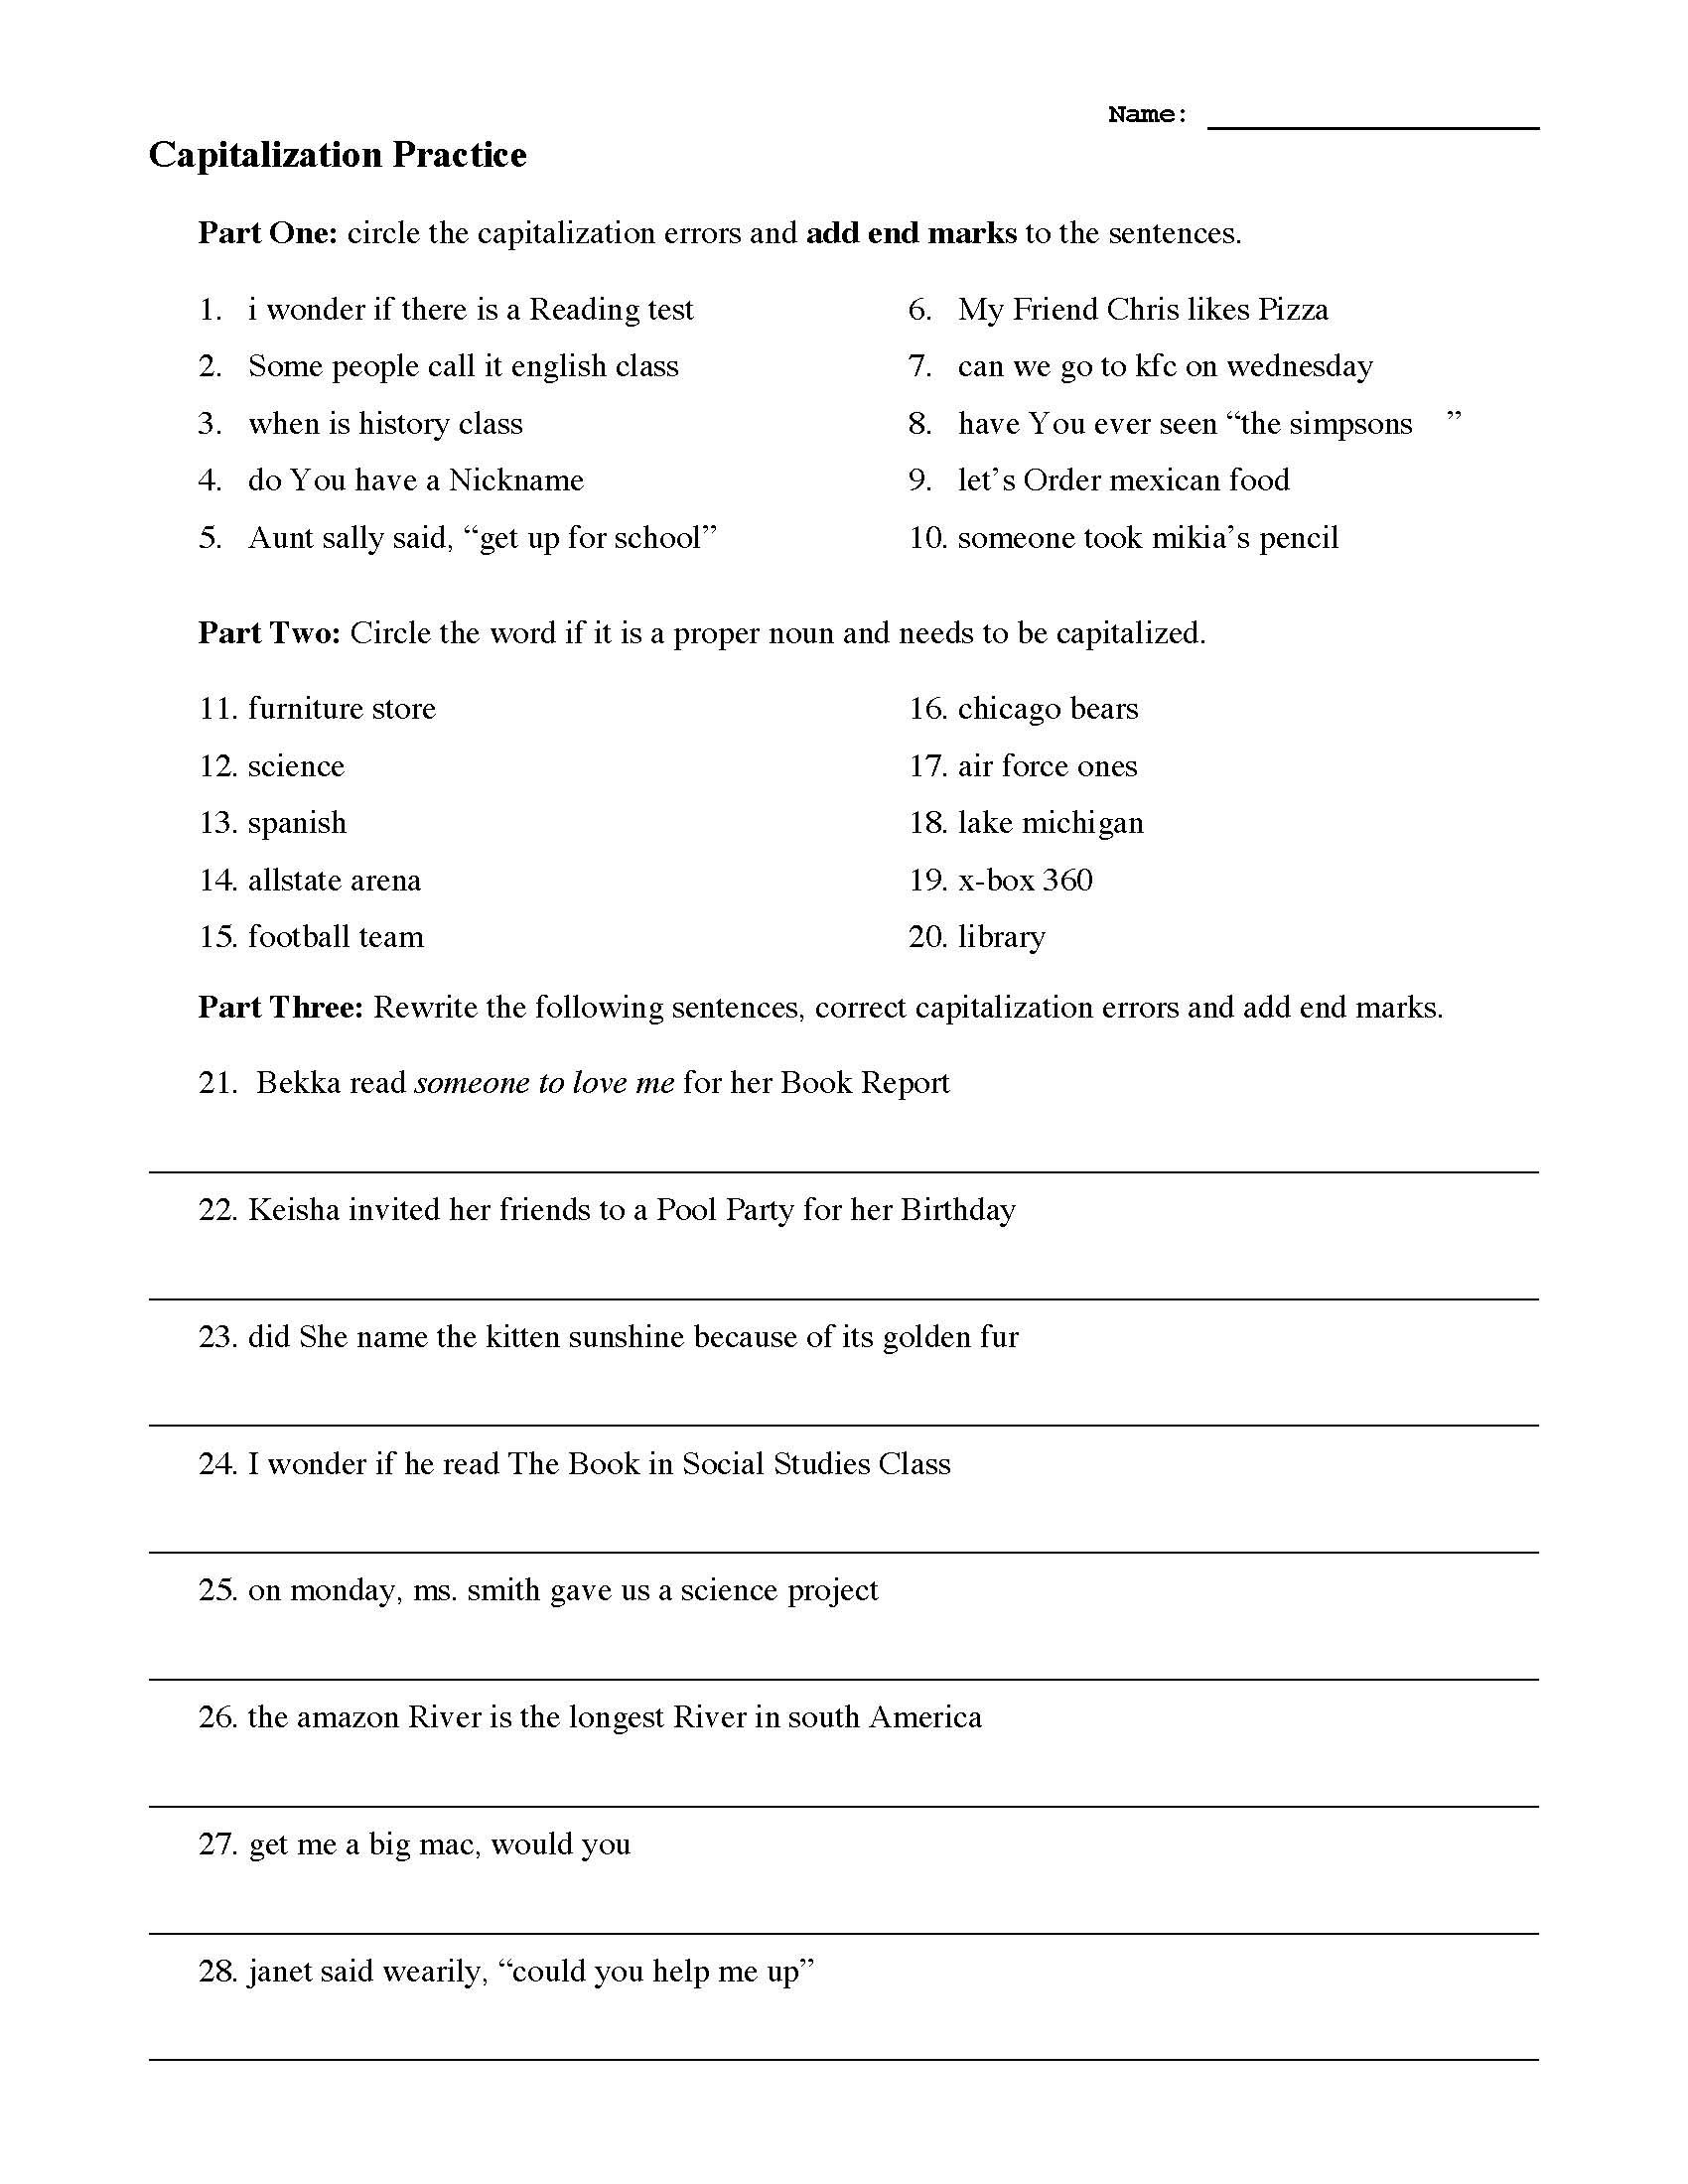 Did You Get It Answer Key Did You Get It Spanish Worksheet Answers Within Spanish Worksheet Answers